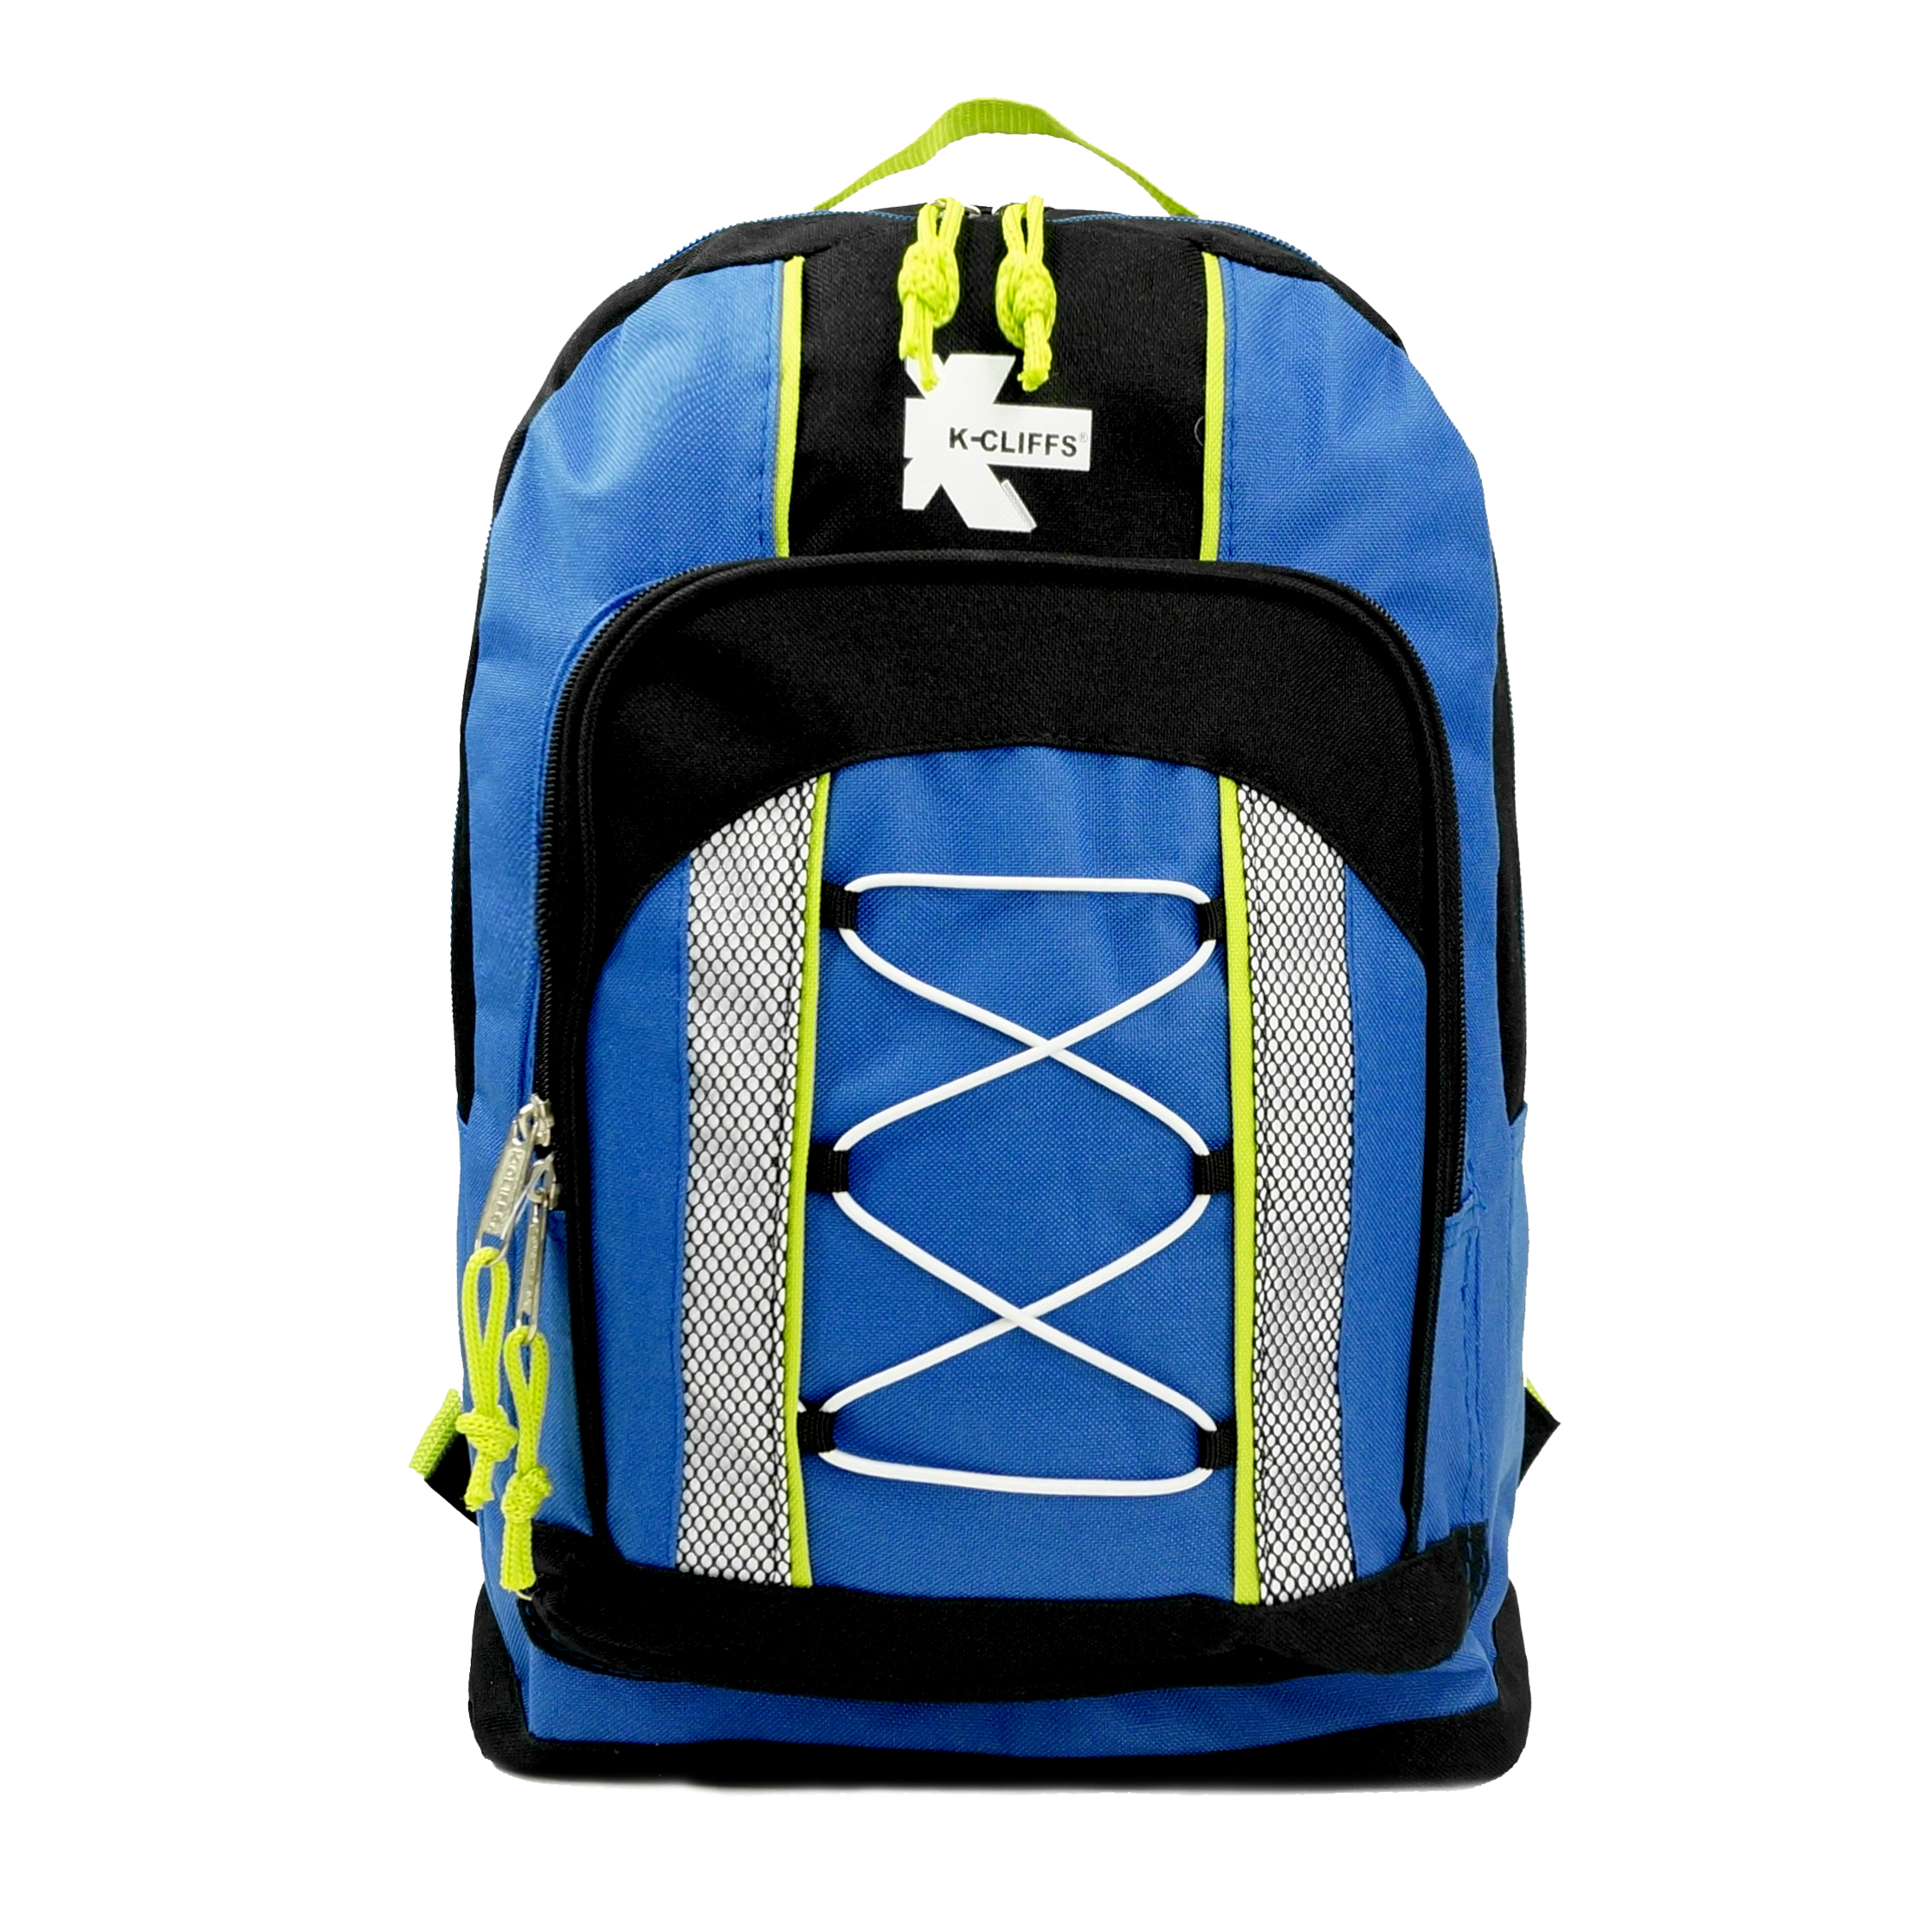 K-Cliffs 15" Lightweight Backpack, Daypack Bungee Water Resistant for Travel School and College, Unisex Color for Casual Everyday Kids & Teens (Blue) - image 1 of 6